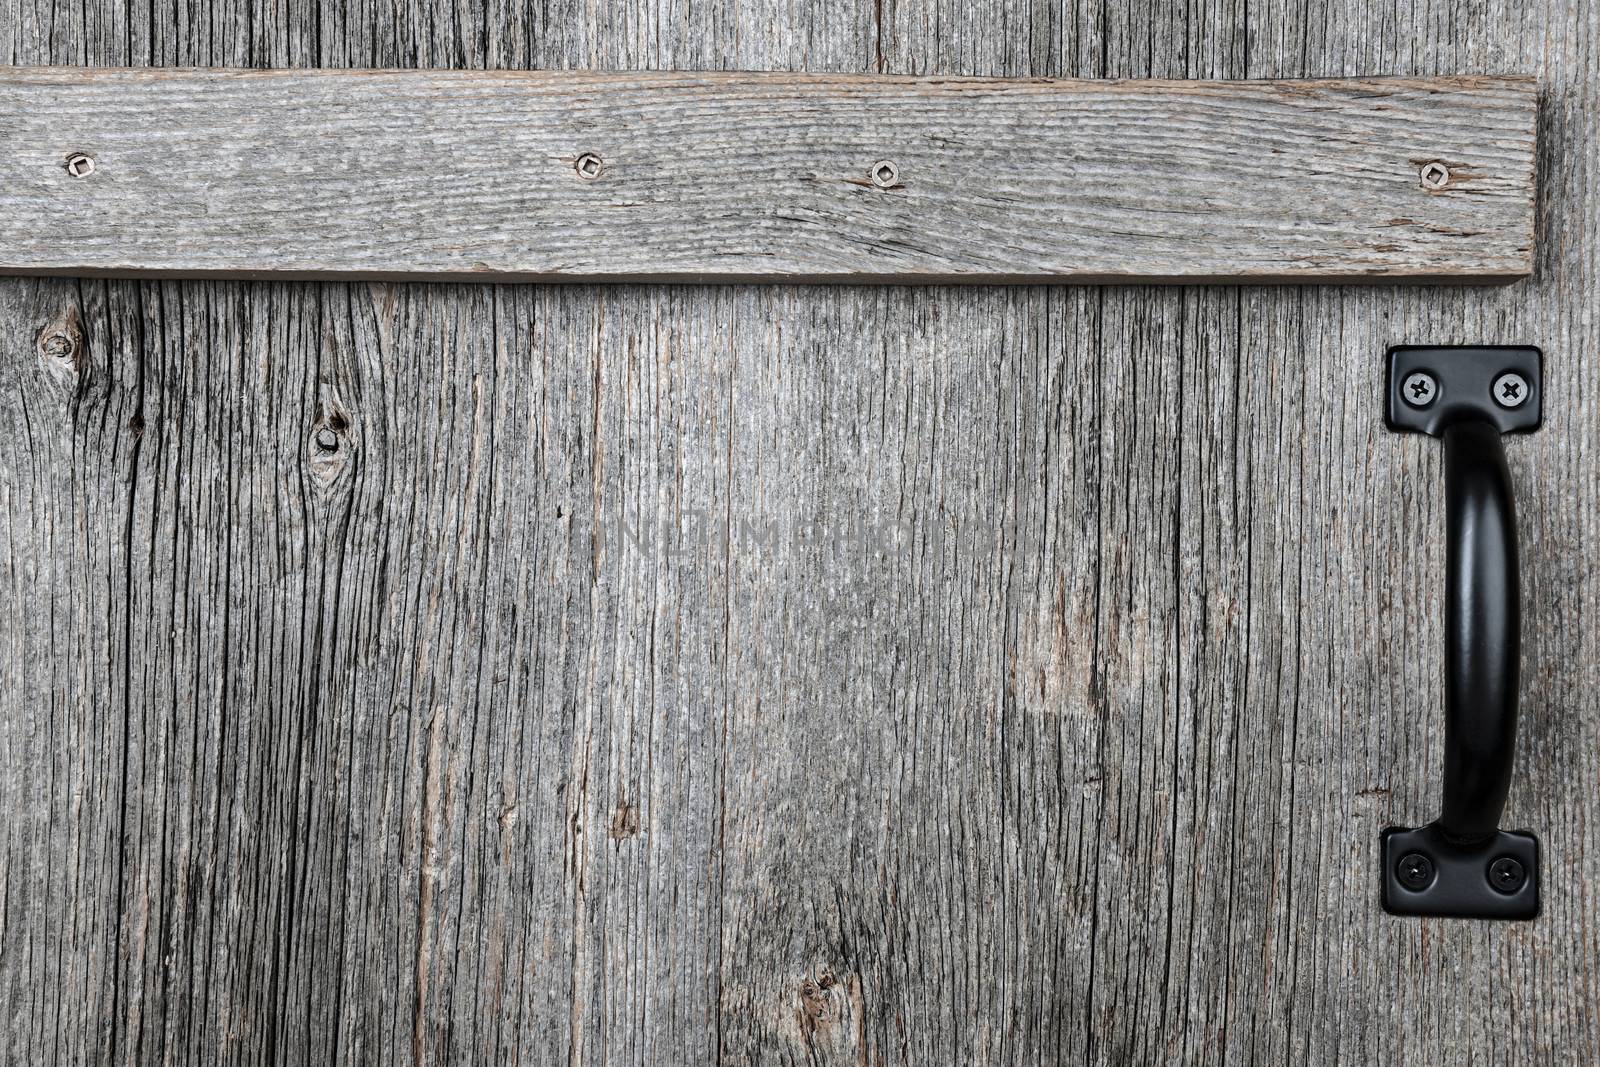 Distressed rustic barn wood door with handle as textured background